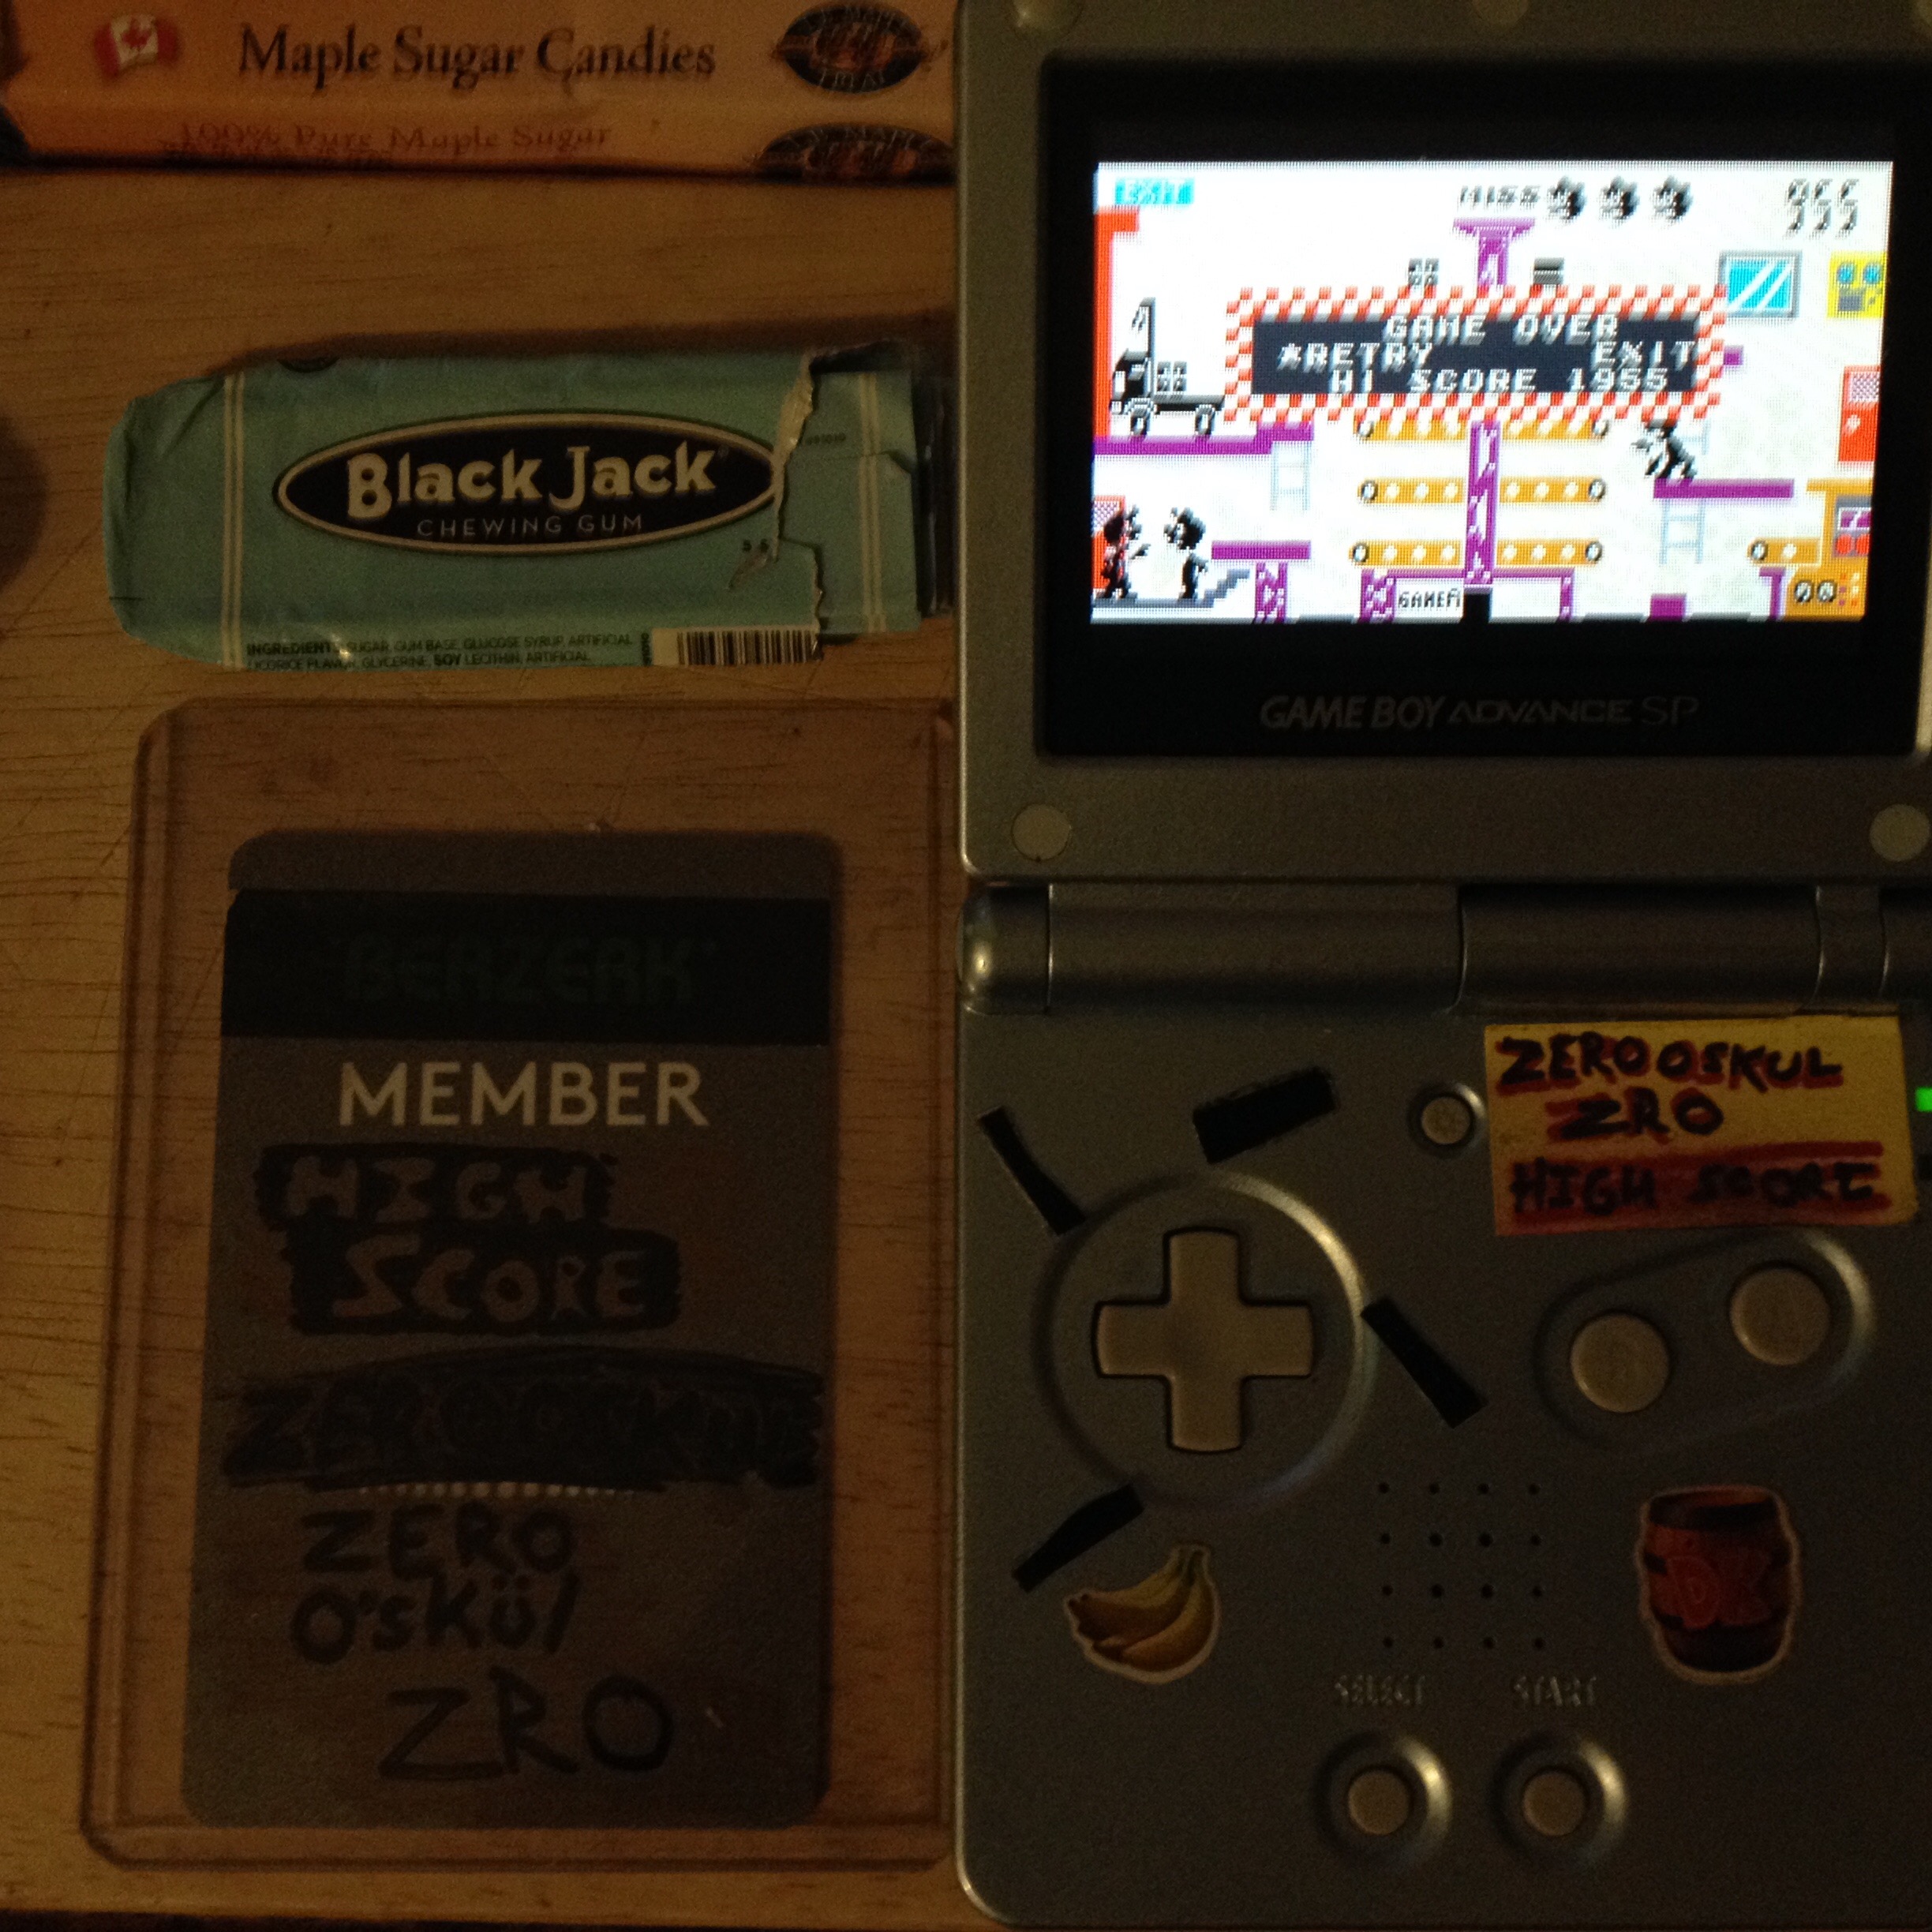 zerooskul: Game & Watch Gallery 4: Mario Bros [Classic: Easy] (GBA) 1,955 points on 2019-08-09 18:37:25